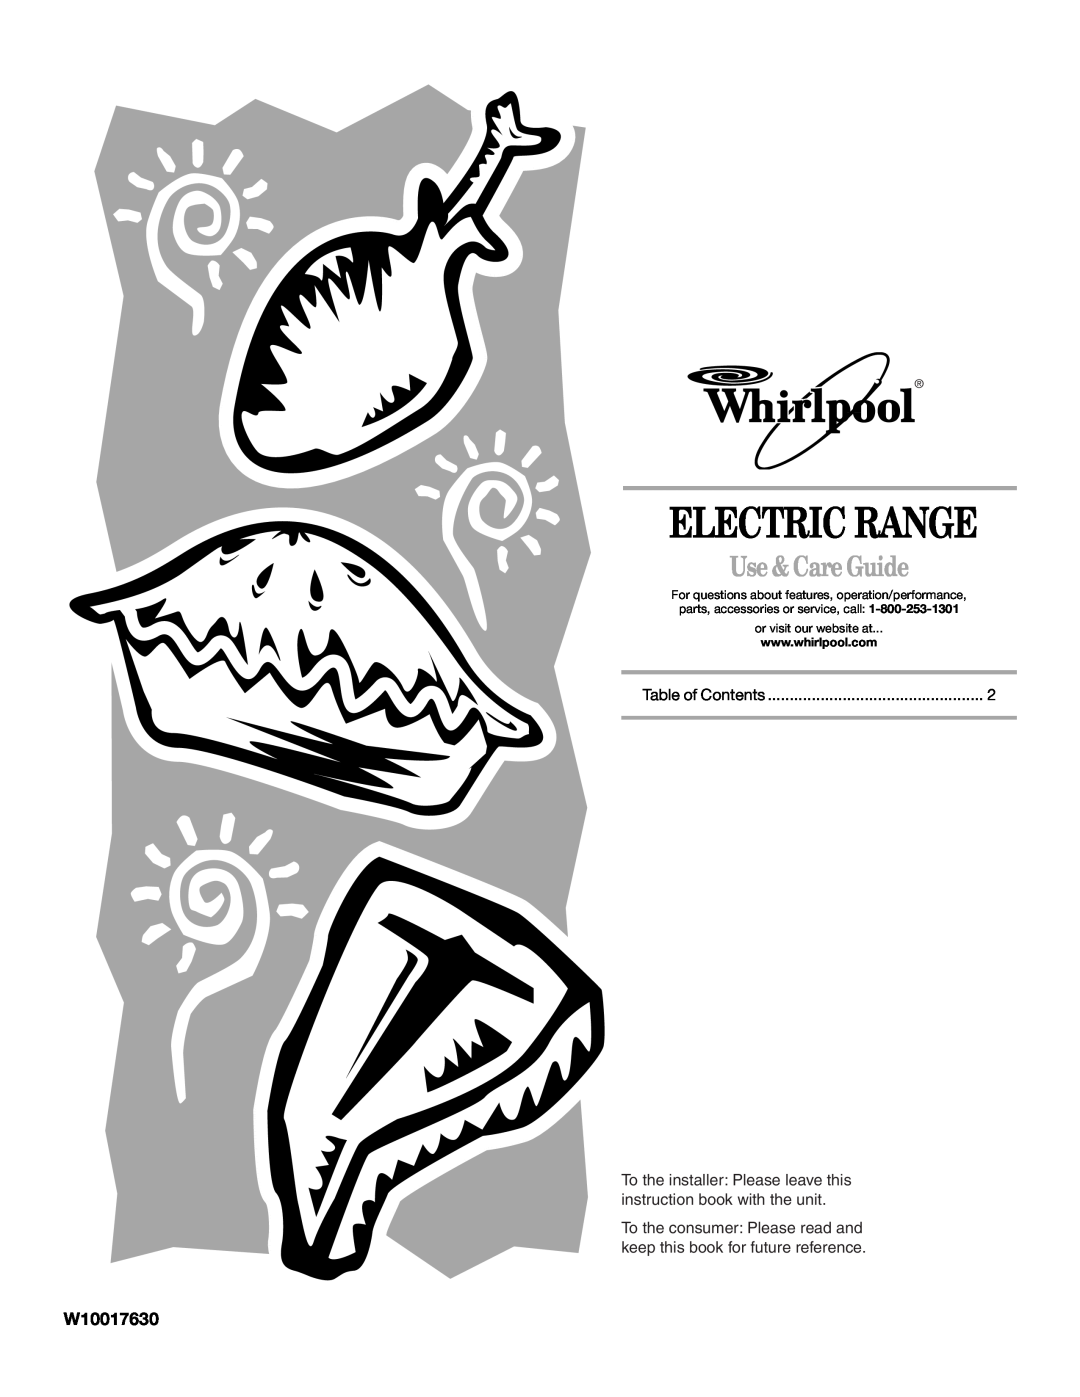 Whirlpool RF380LXPB3 manual W10017630, Electric Range, Use & Care Guide, or visit our website at 